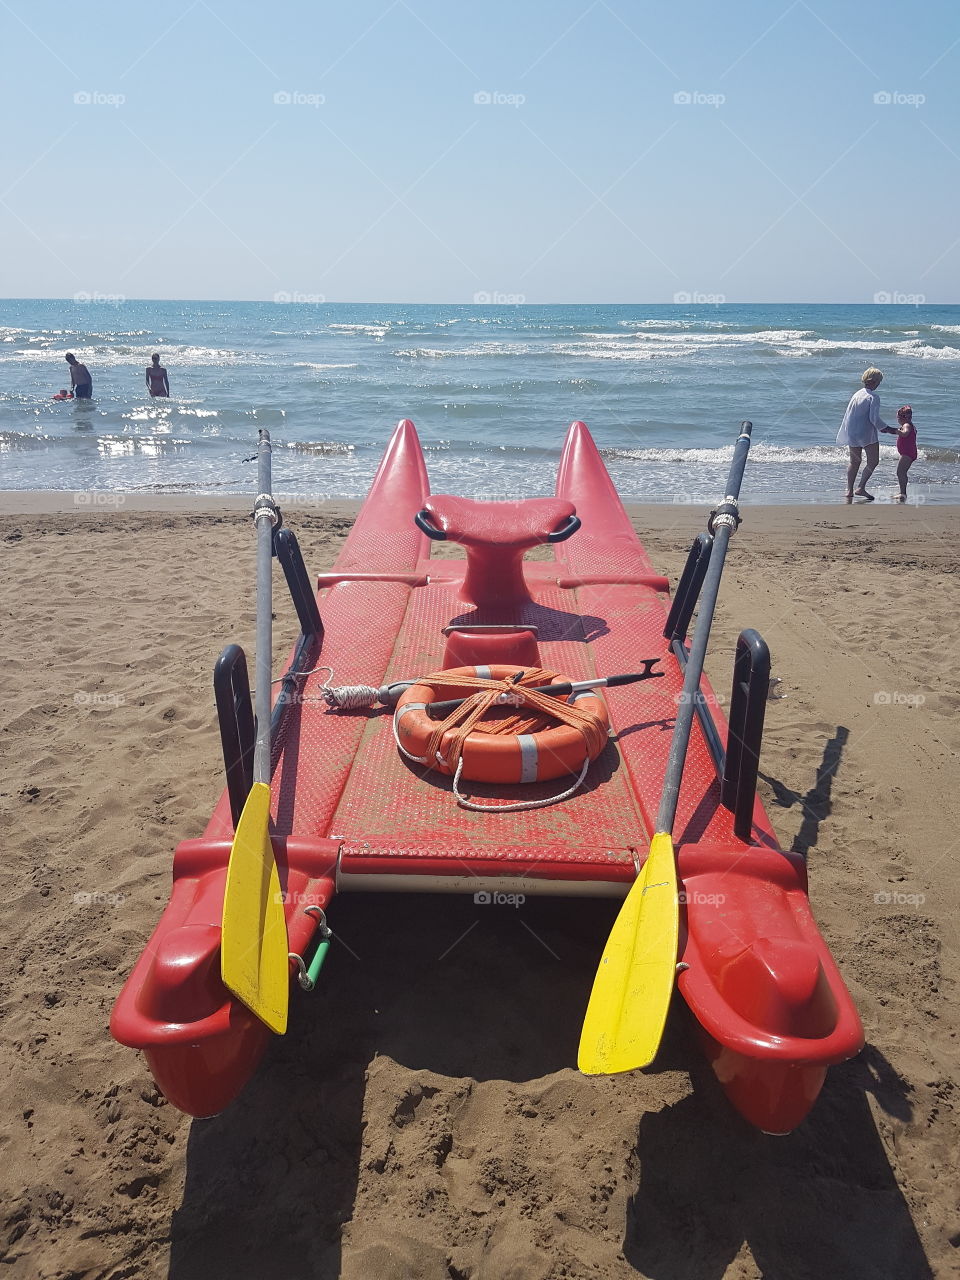 Lifeguard raw boat on the beach in Tuscany